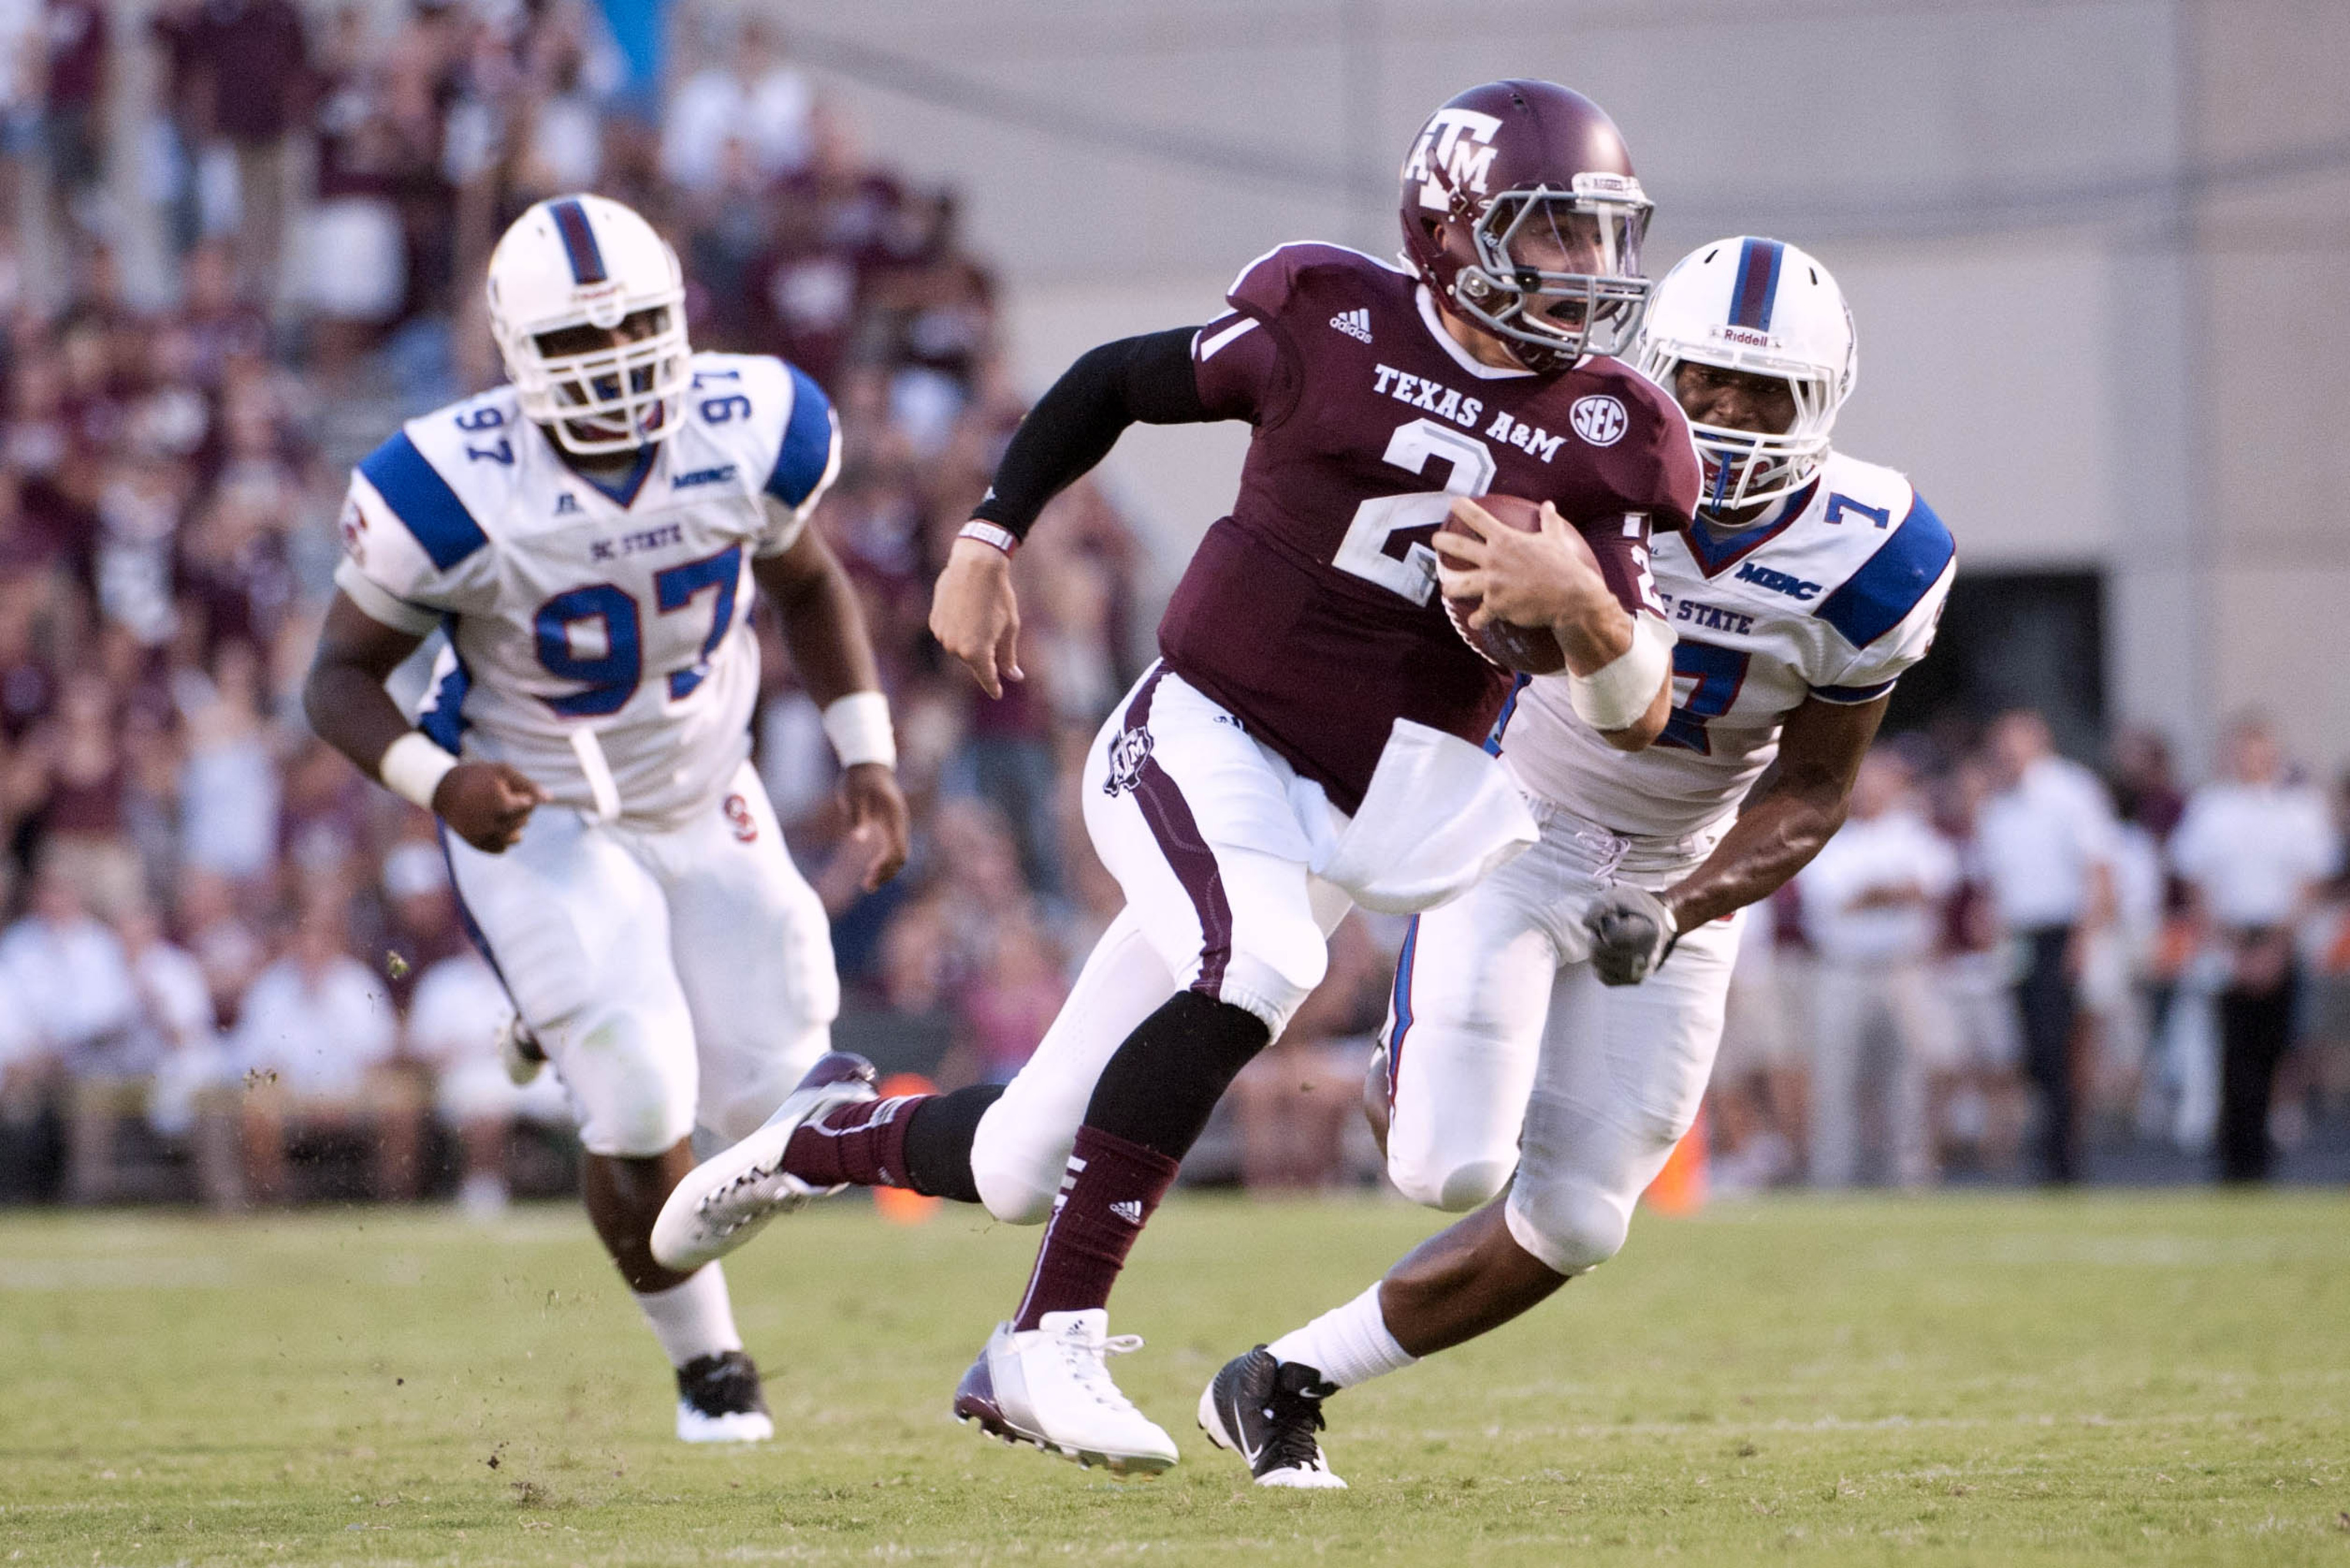 Sep 22, 2012; College Station, TX, USA; Texas A&M Aggies quarterback Johnny Manziel (2) runs for a touchdown against the South Carolina State Bulldogs during the first half at Kyle Field. Mandatory Credit: Brendan Maloney-US PRESSWIRE